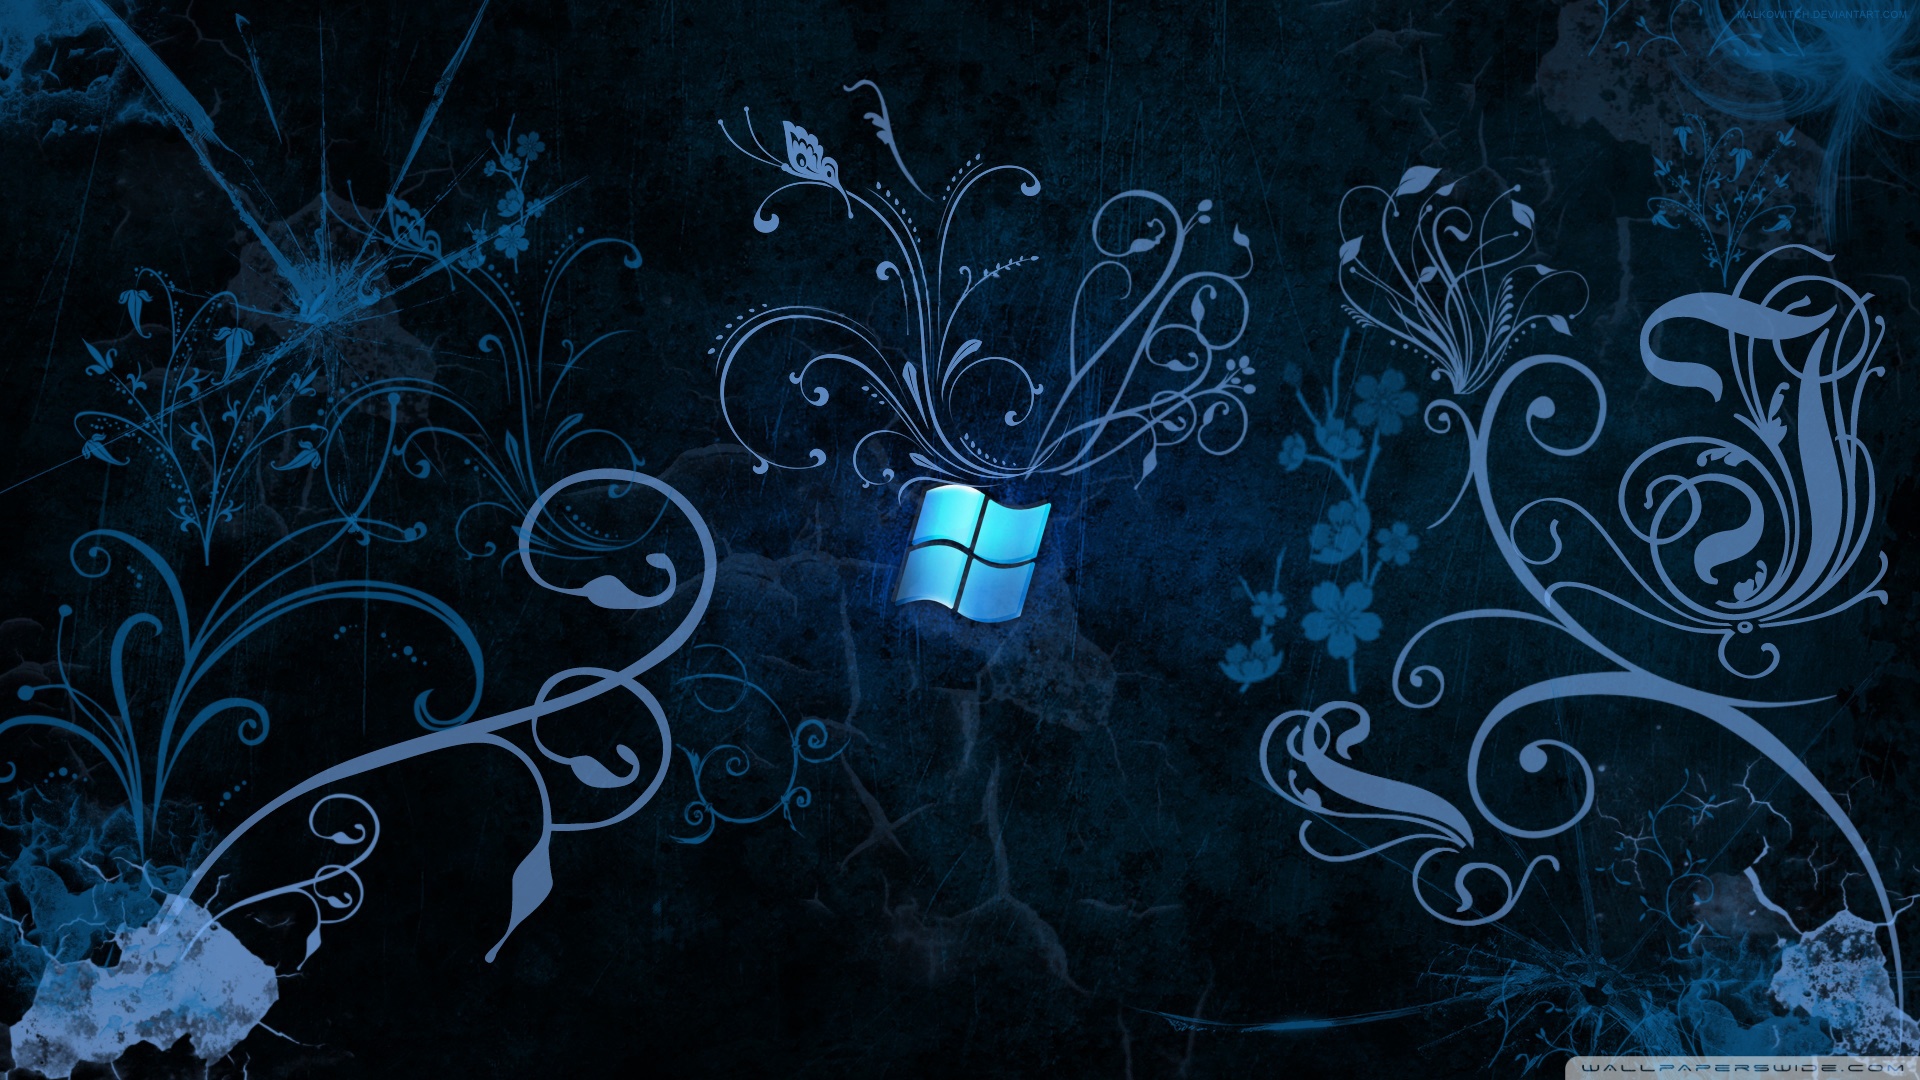 Windows 8 dark wallpaper wallpapers and images ...